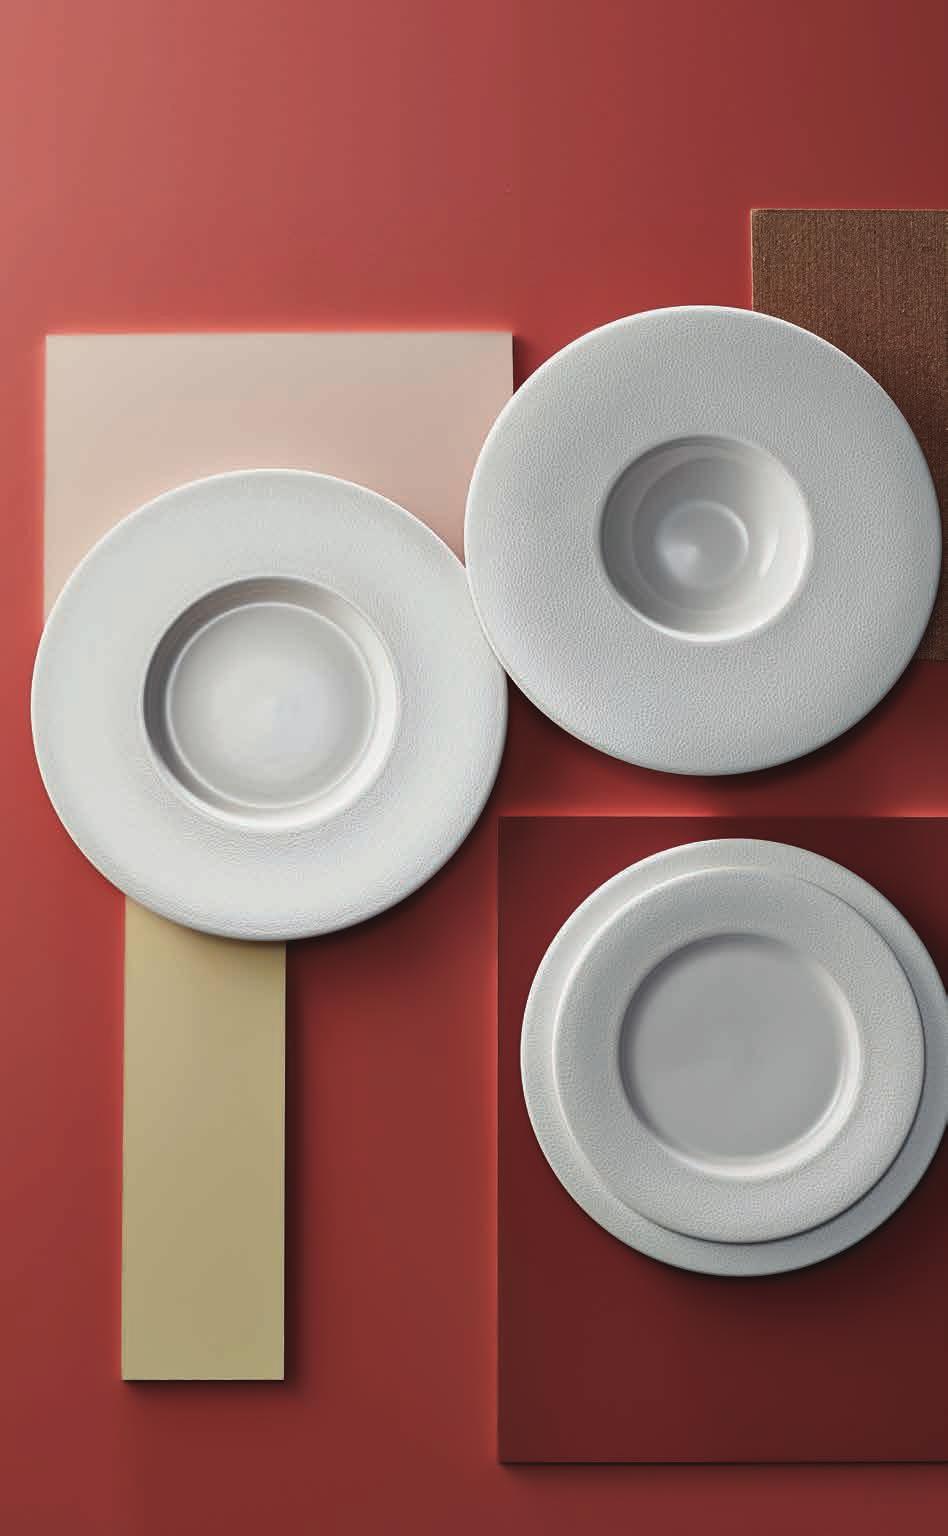 01 Foam Today s chefs are looking for a new twist on plain white tableware that doesn t detract from the pristine finish it provides.